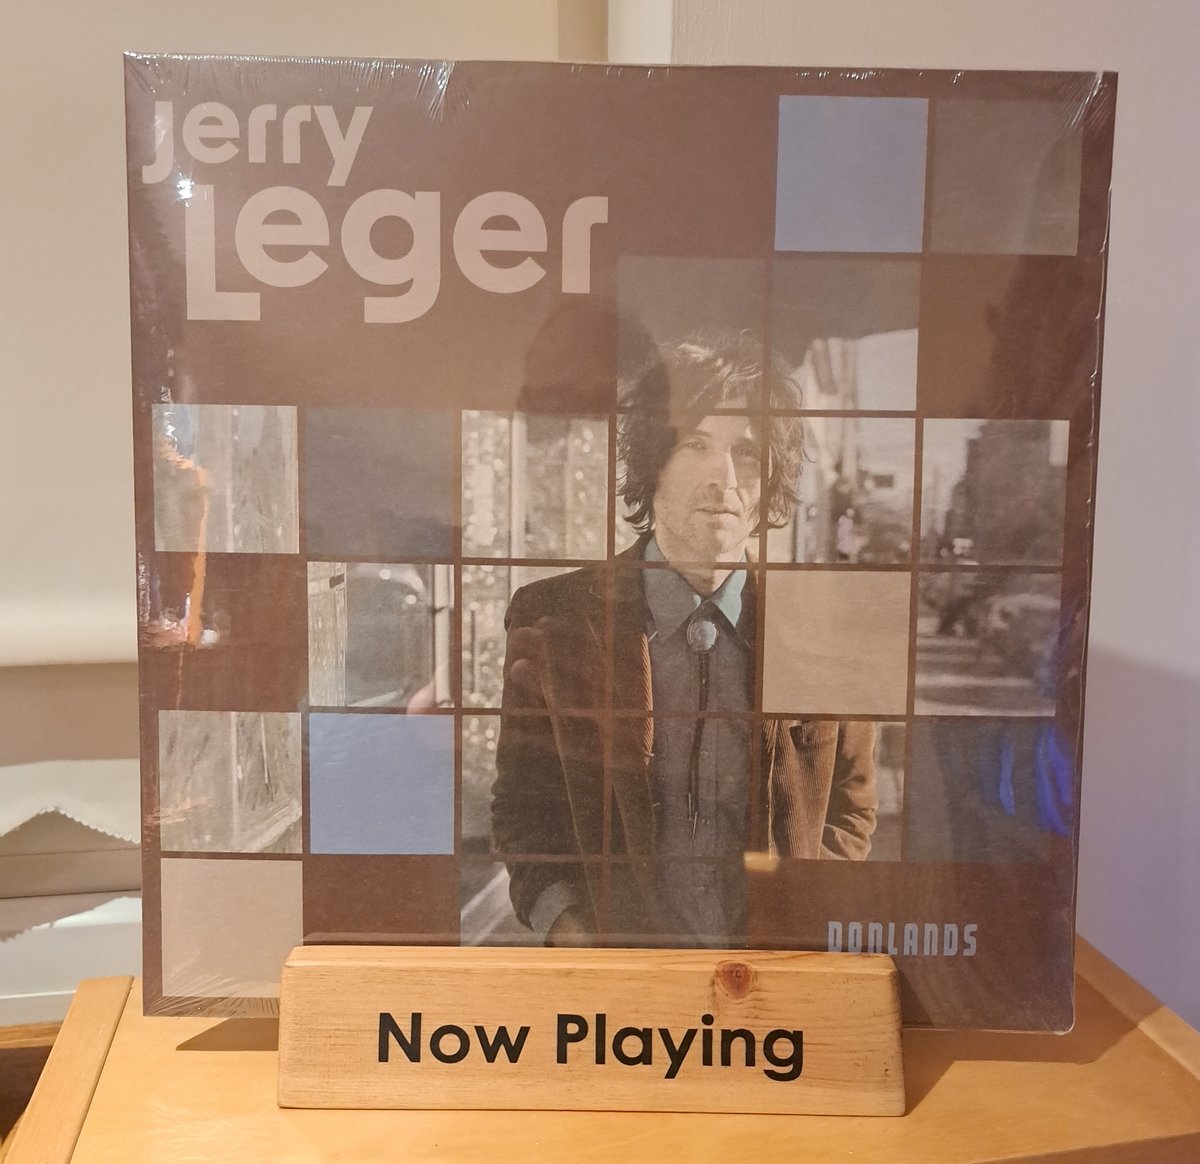 On the turntable tonight, bought from the man himself at his grand gig last night @thegladcafe @JerryLeger . Thanks to @suburbs1